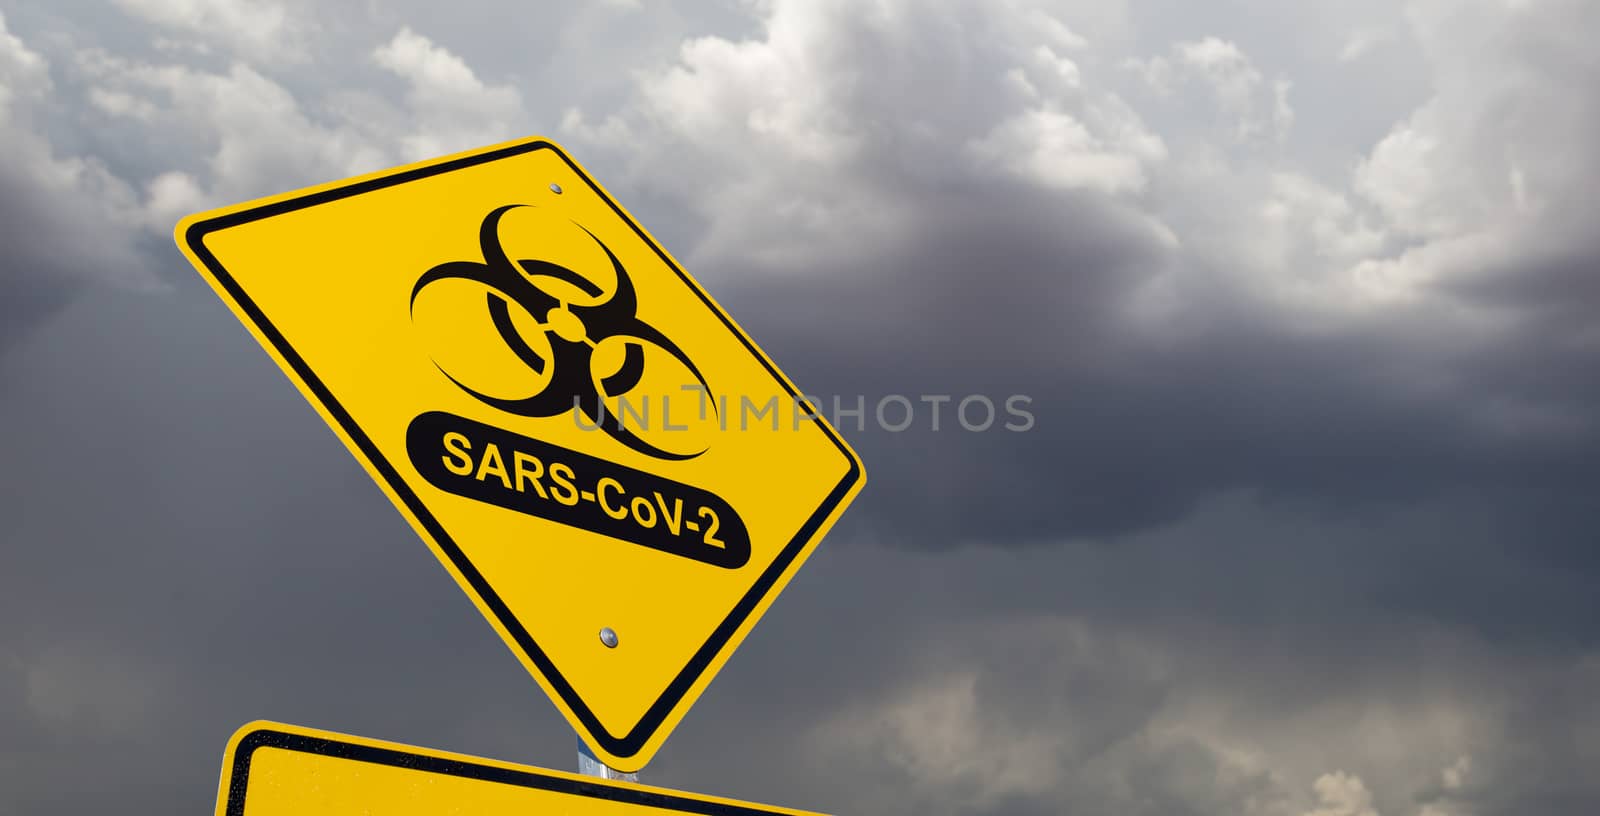 Bio-hazard Symbol With SARS-CoV-2 Coronaravirus Yellow Road Sign Against Ominous Stormy Cloudy Sky. by Feverpitched